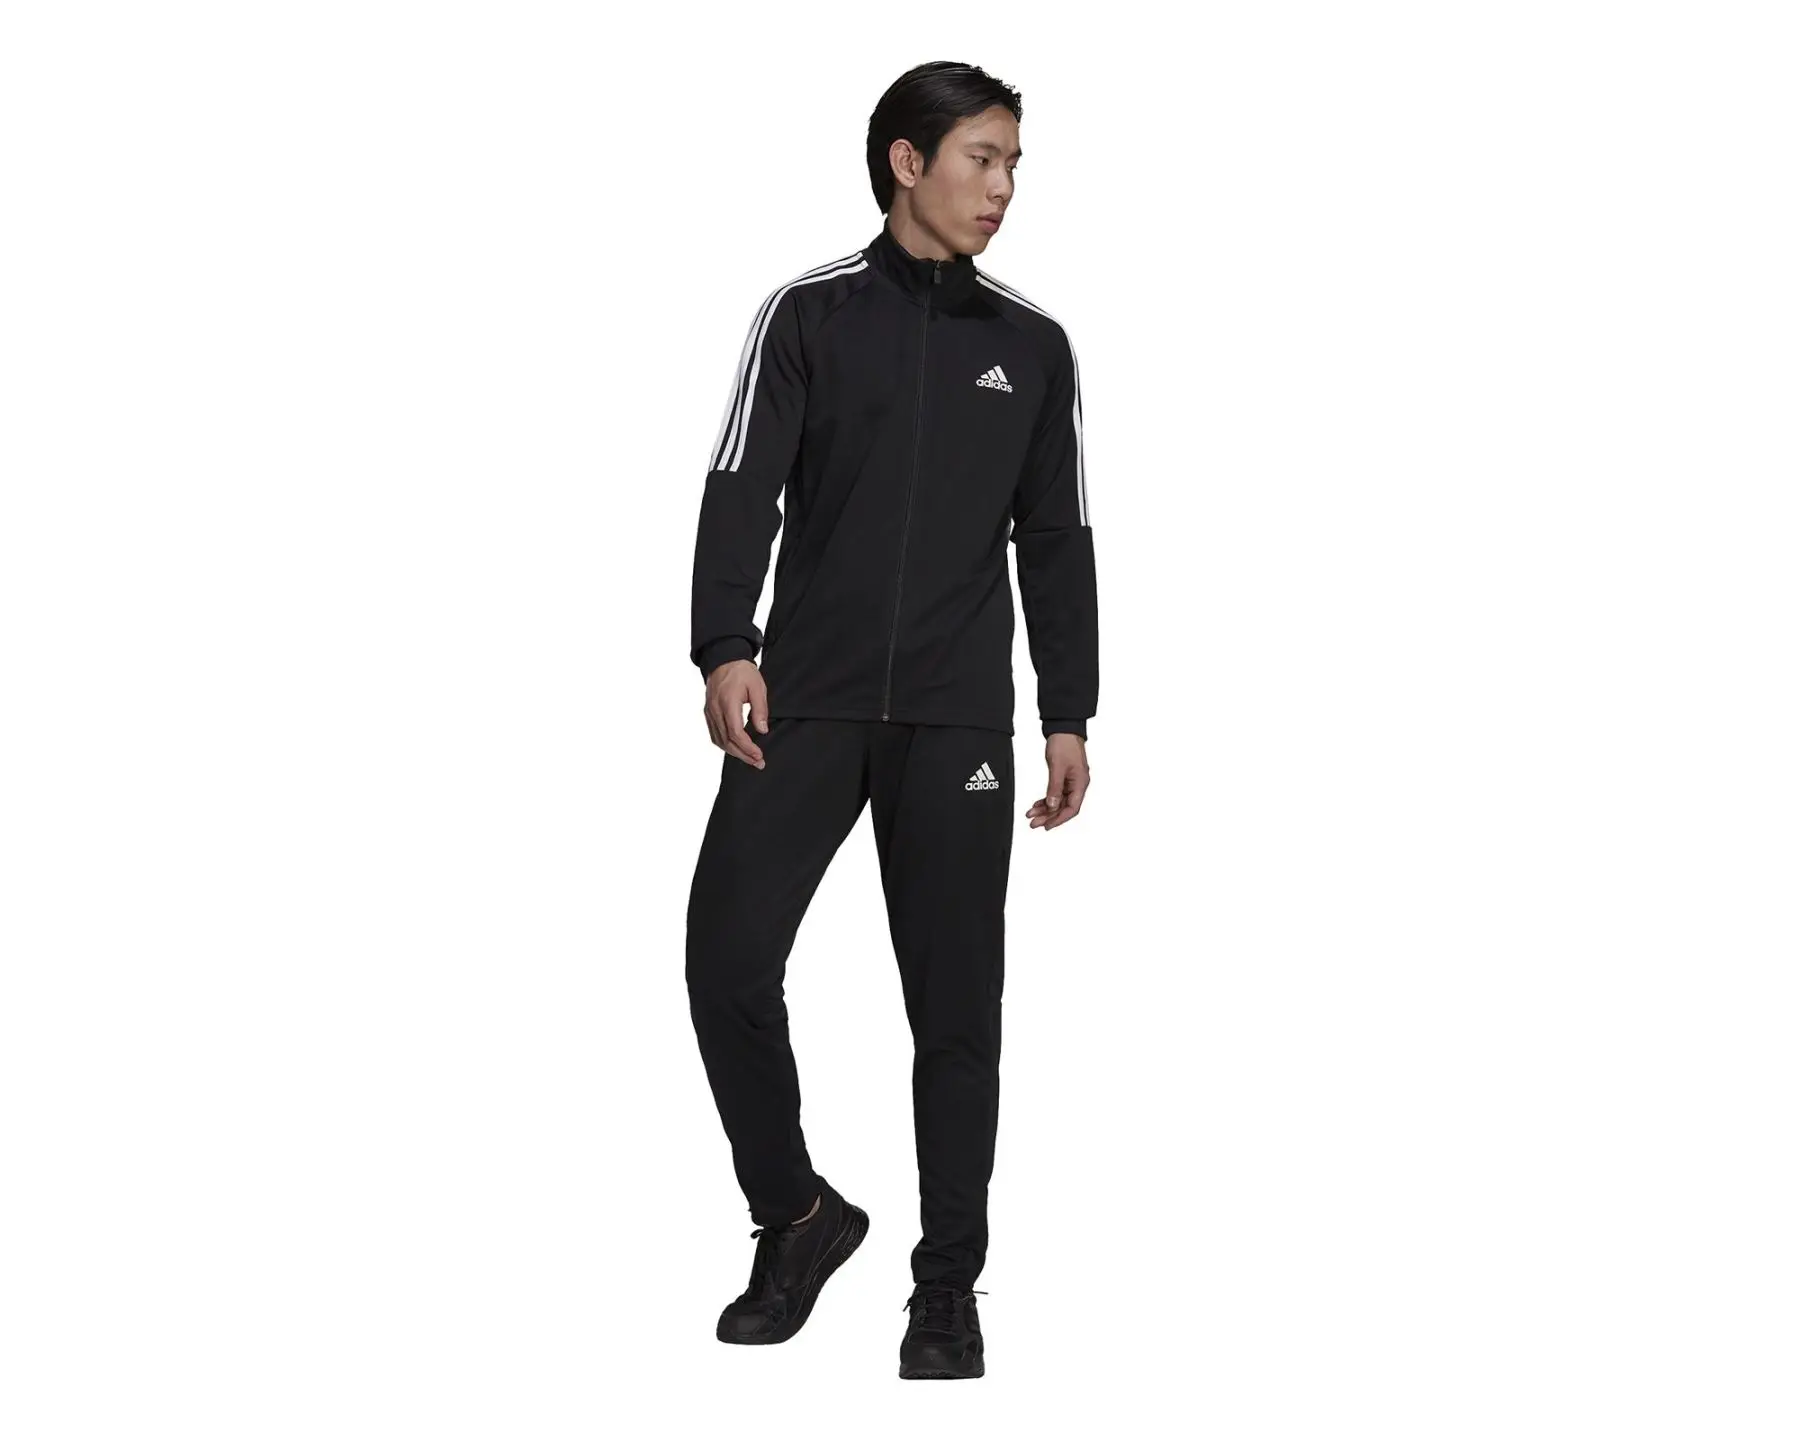 Adidas Original M Sereno Ts Men's Tracksuit Set Football Wear and Training Products Sports Exercise Black Color Top and Bottom